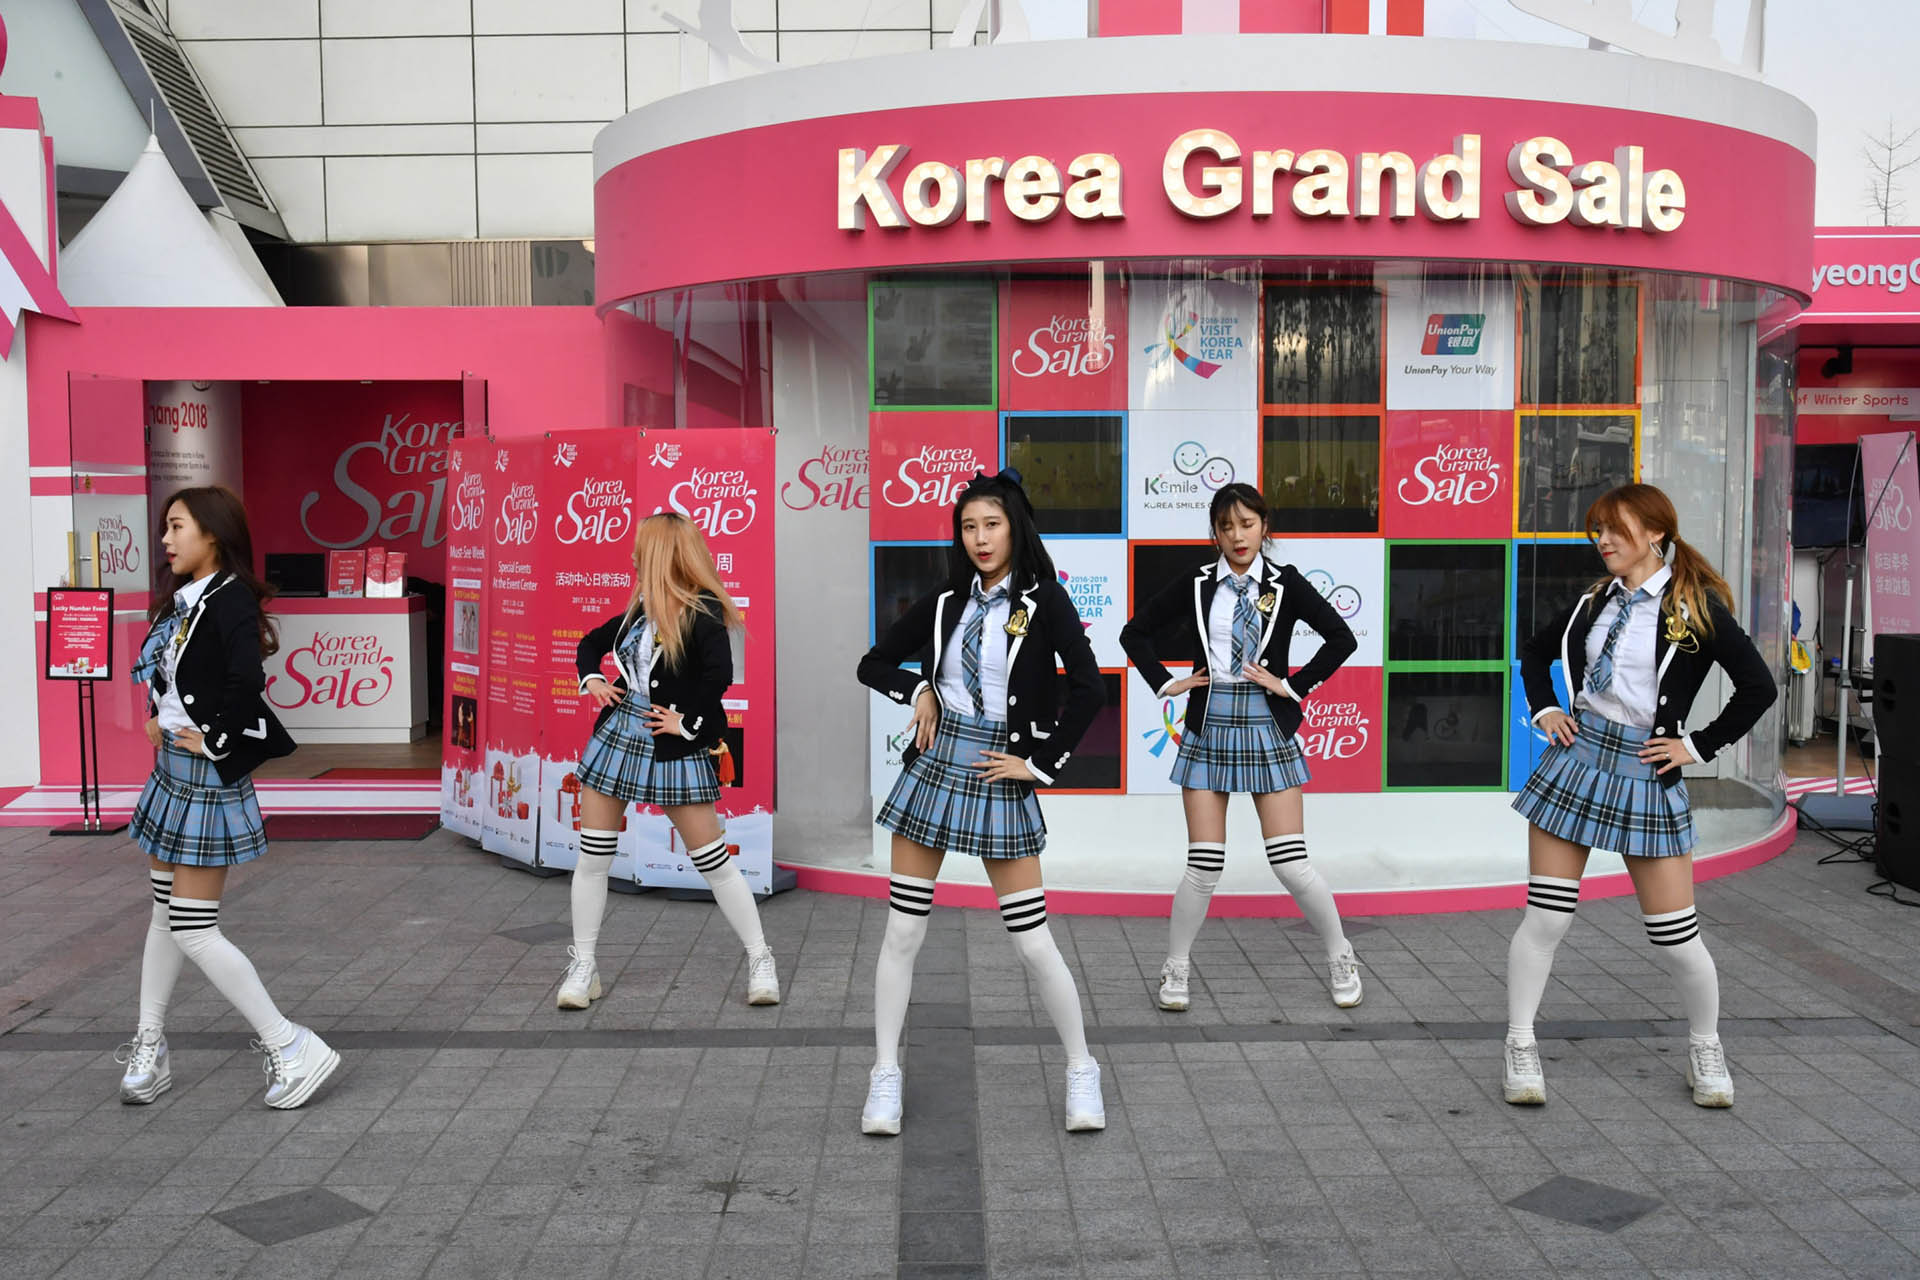 One of the country's biggest shopping and tourism events Korea Grand Sale 2019